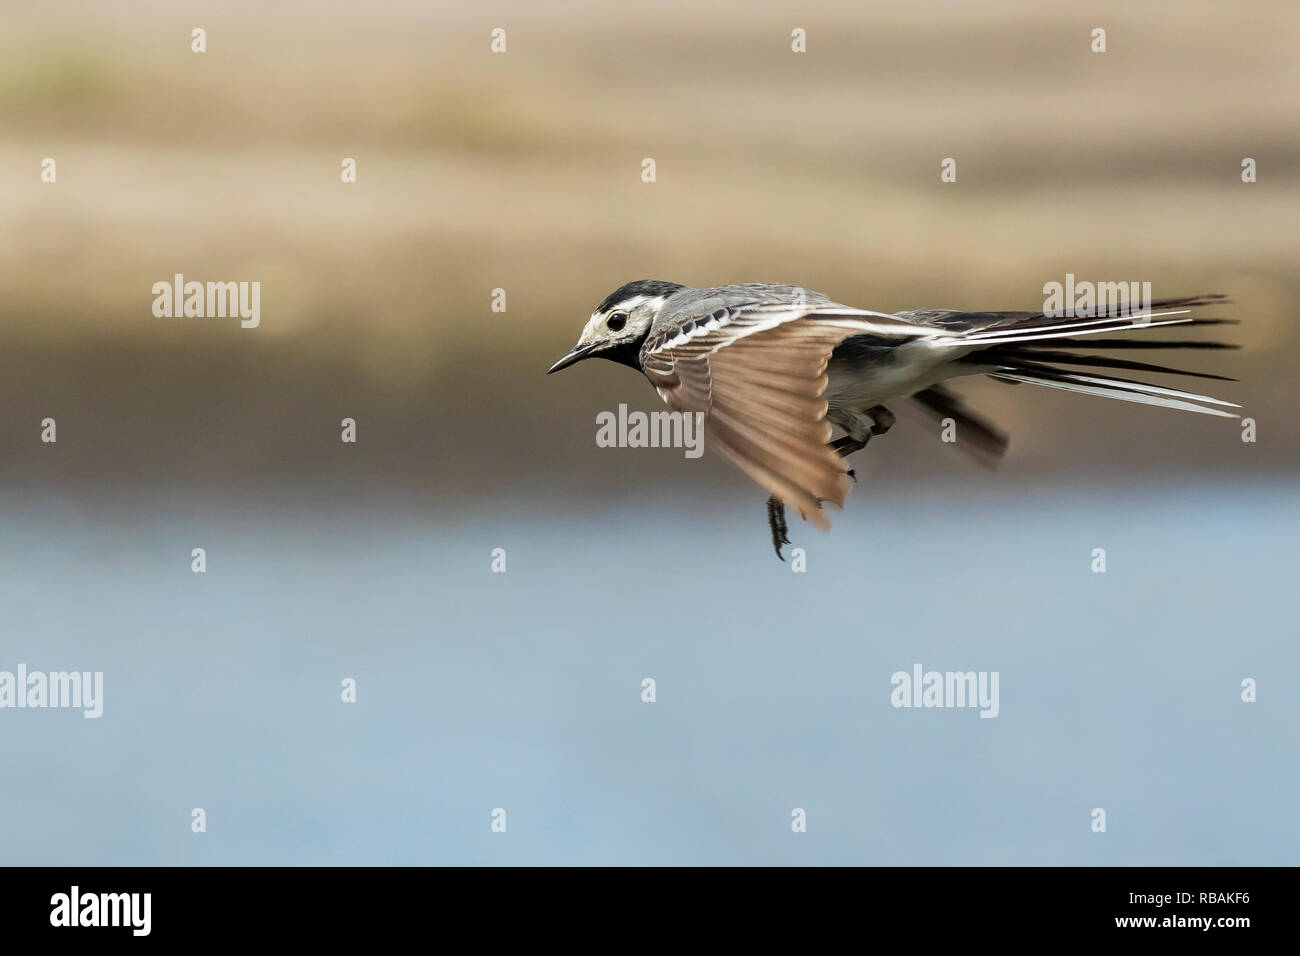 Closeup of a White Wagtail, Motacilla alba, in flight. Bird with white, gray and black feathers. The White Wagtail is the national bird of Latvia Stock Photo